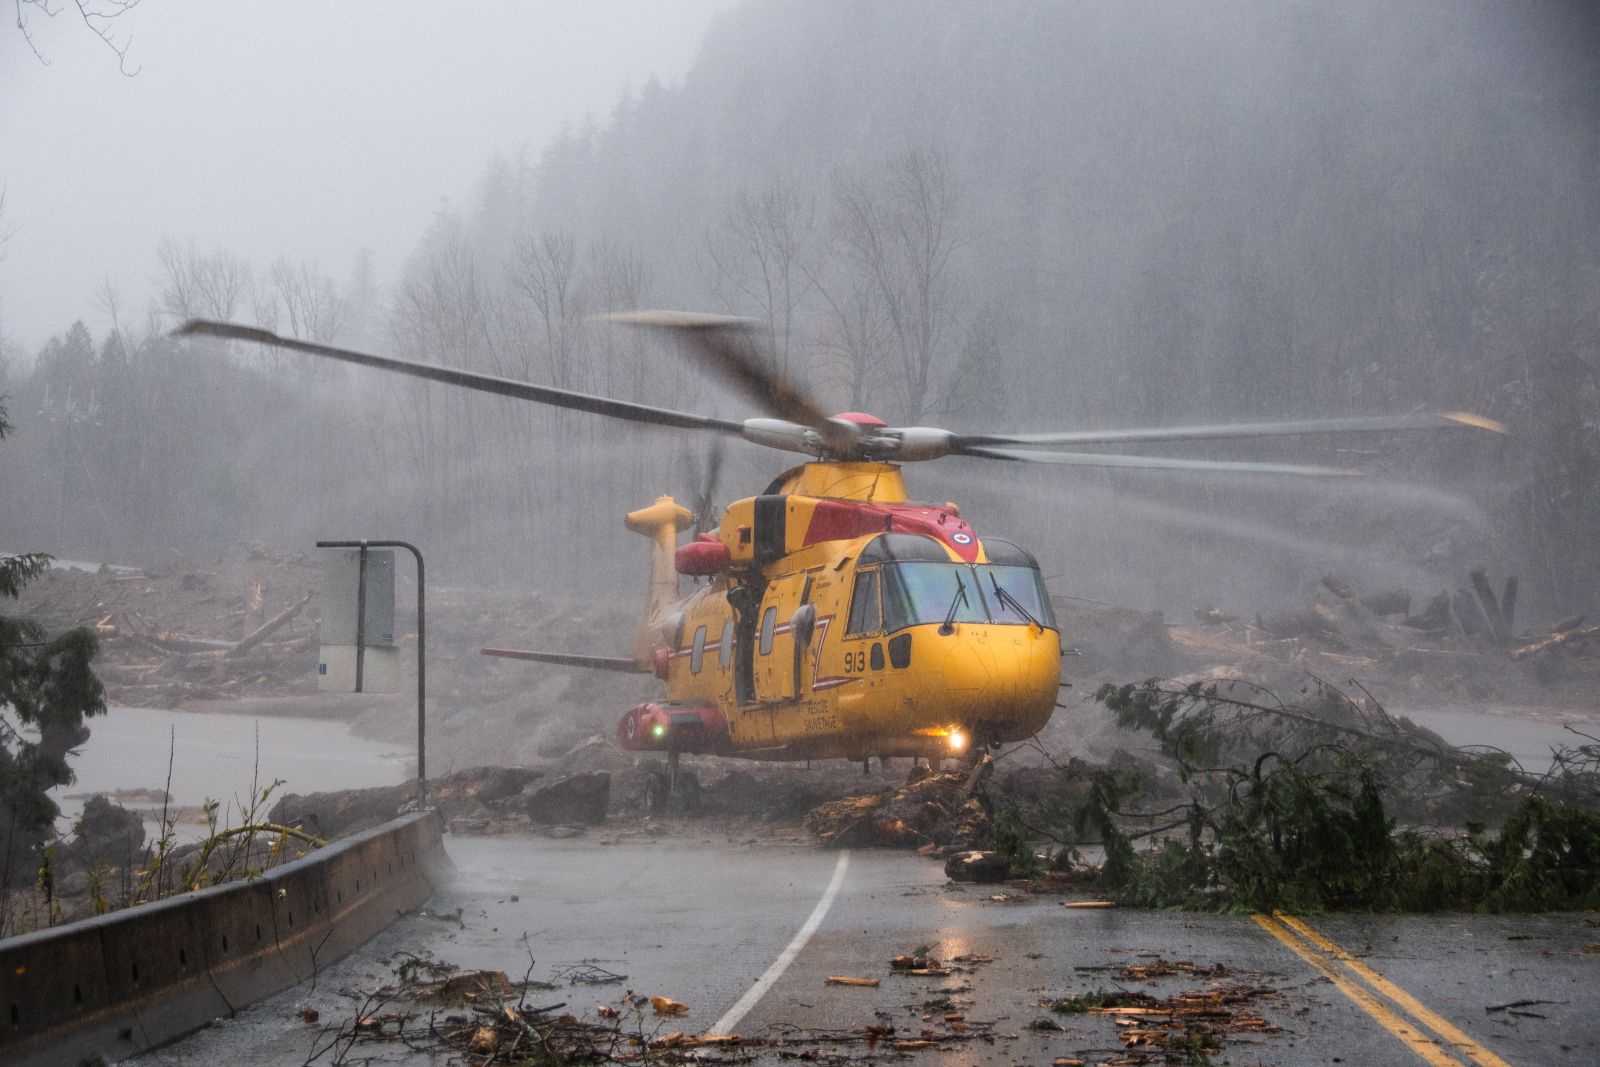 epa09587344 A handout photo made available by the Royal Canadian Air Force showing rescue operations following flooding caused by days of rain in Agassiz, British Columbia, Canada, 16 November 2021 (issued 17 November 2021). One person in reported dead and flooding has caused damage to roads and bridges in western Canada near Vancouver.  EPA/ROYAL CANADIAN AIR FORCE HANDOUT  HANDOUT EDITORIAL USE ONLY/NO SALES